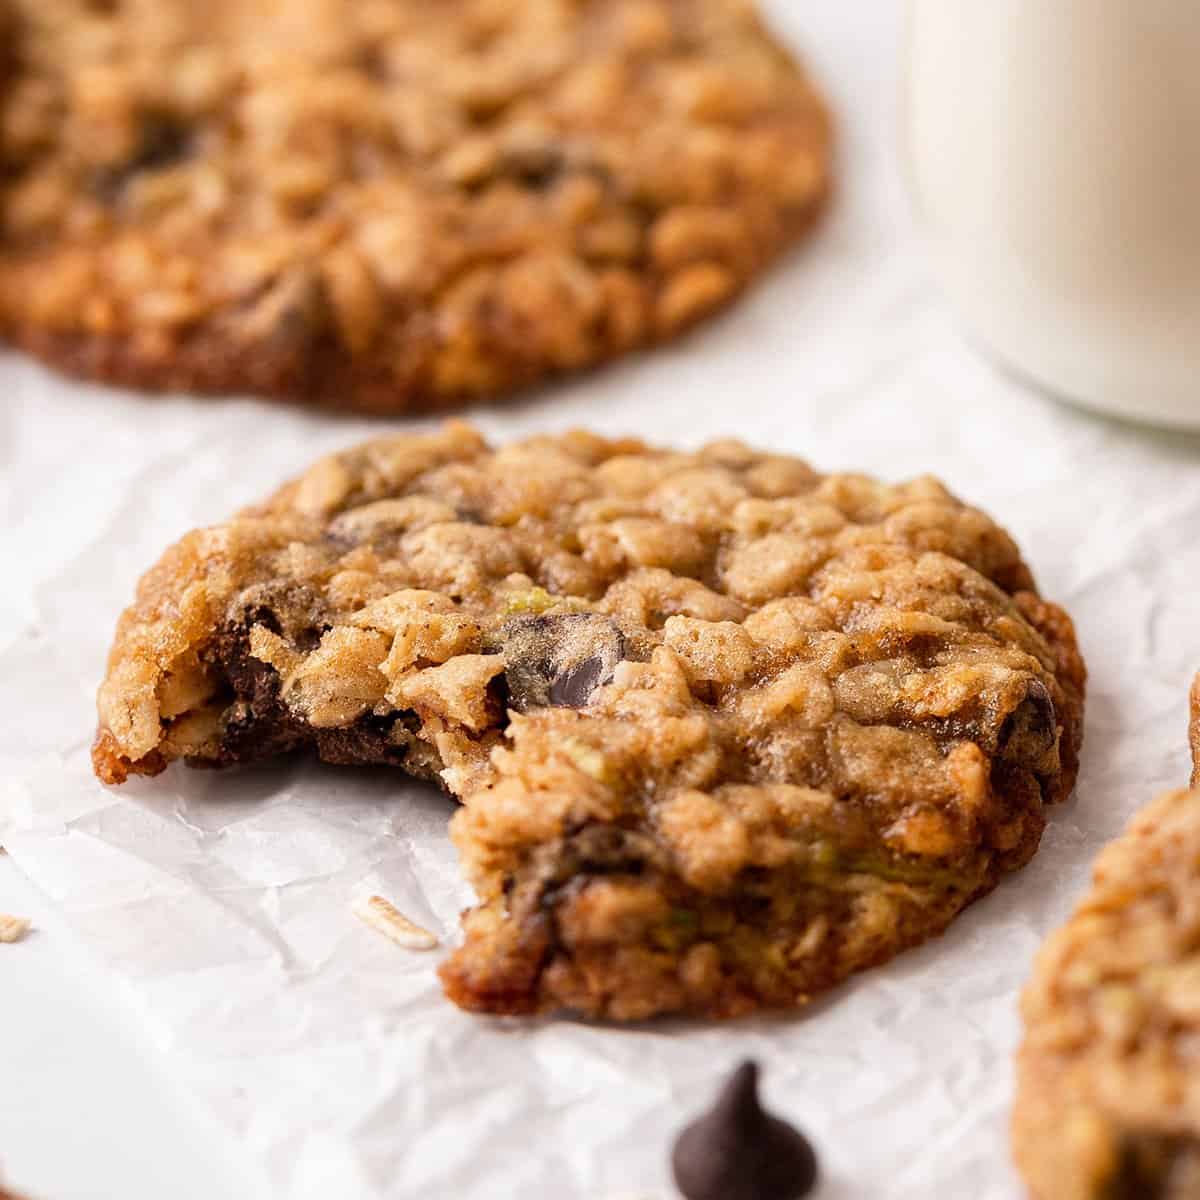 2 Oatmeal Zucchini Cookies - one has a bite taken out of it. 